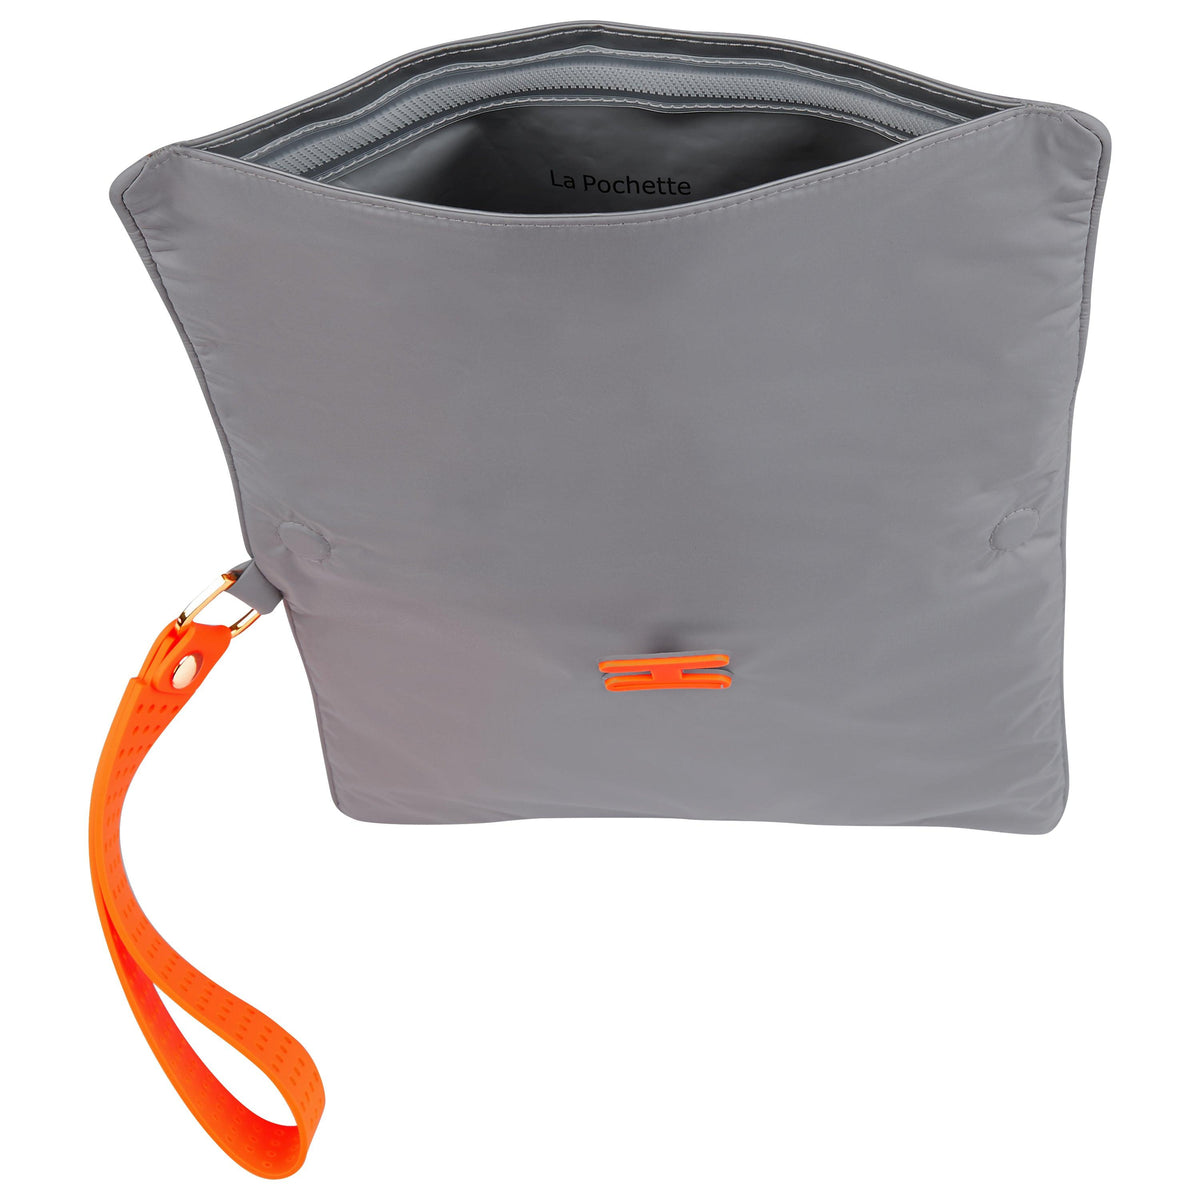 Small wet bag in Shadow Neon Orange open, and showing waterproof lining 